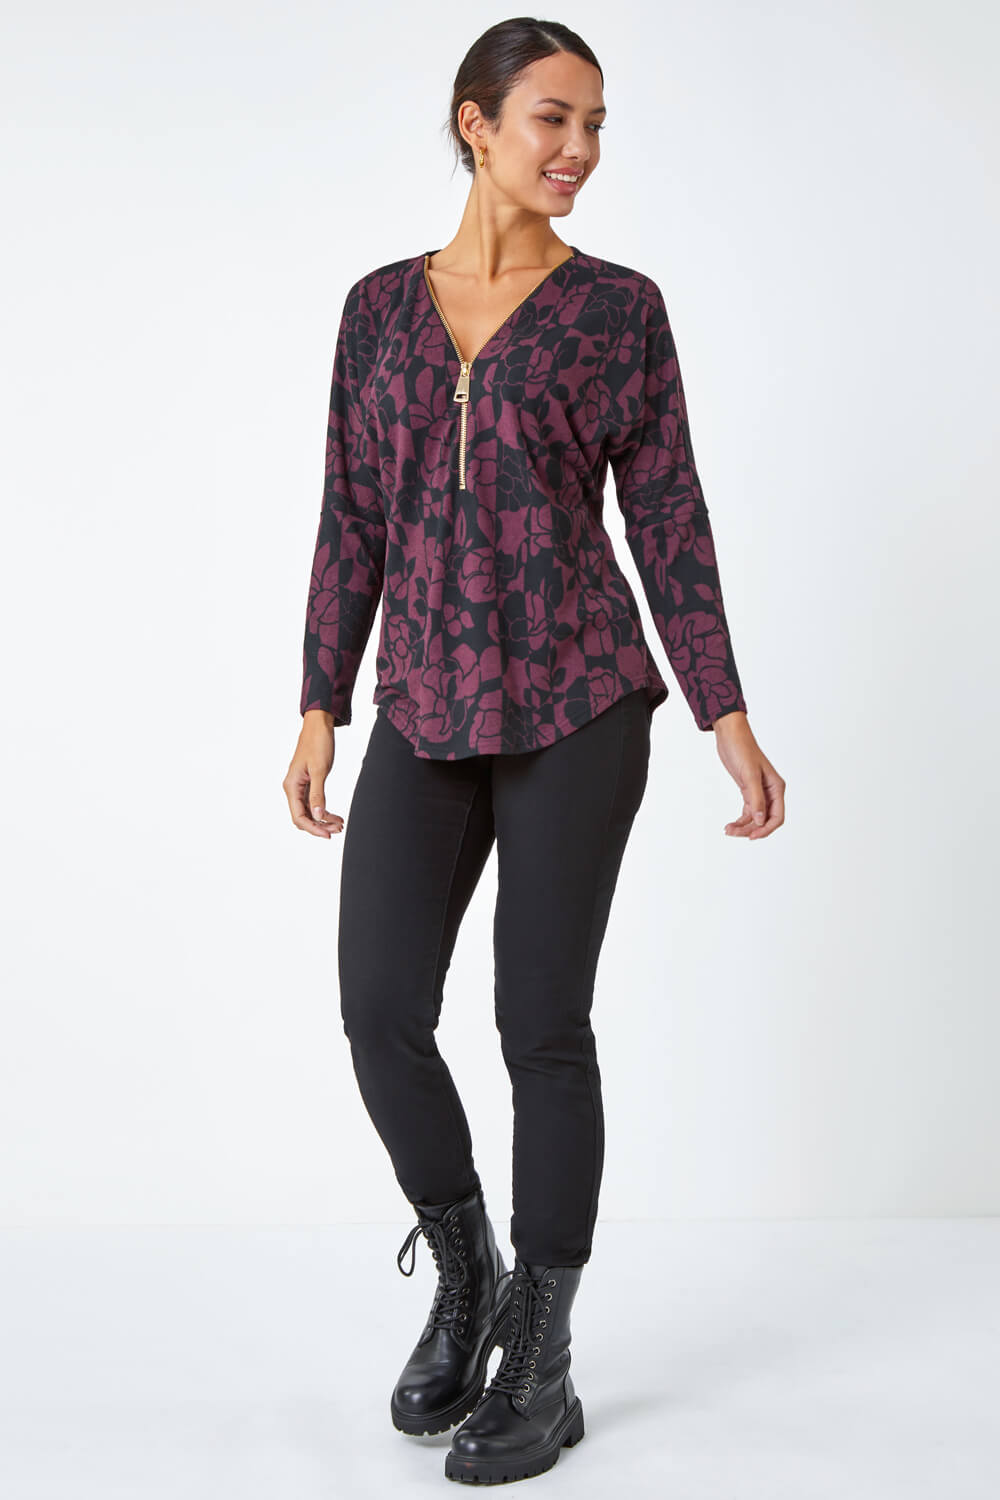 Burgundy Floral Stretch Jersey Zip Detail Top, Image 2 of 5